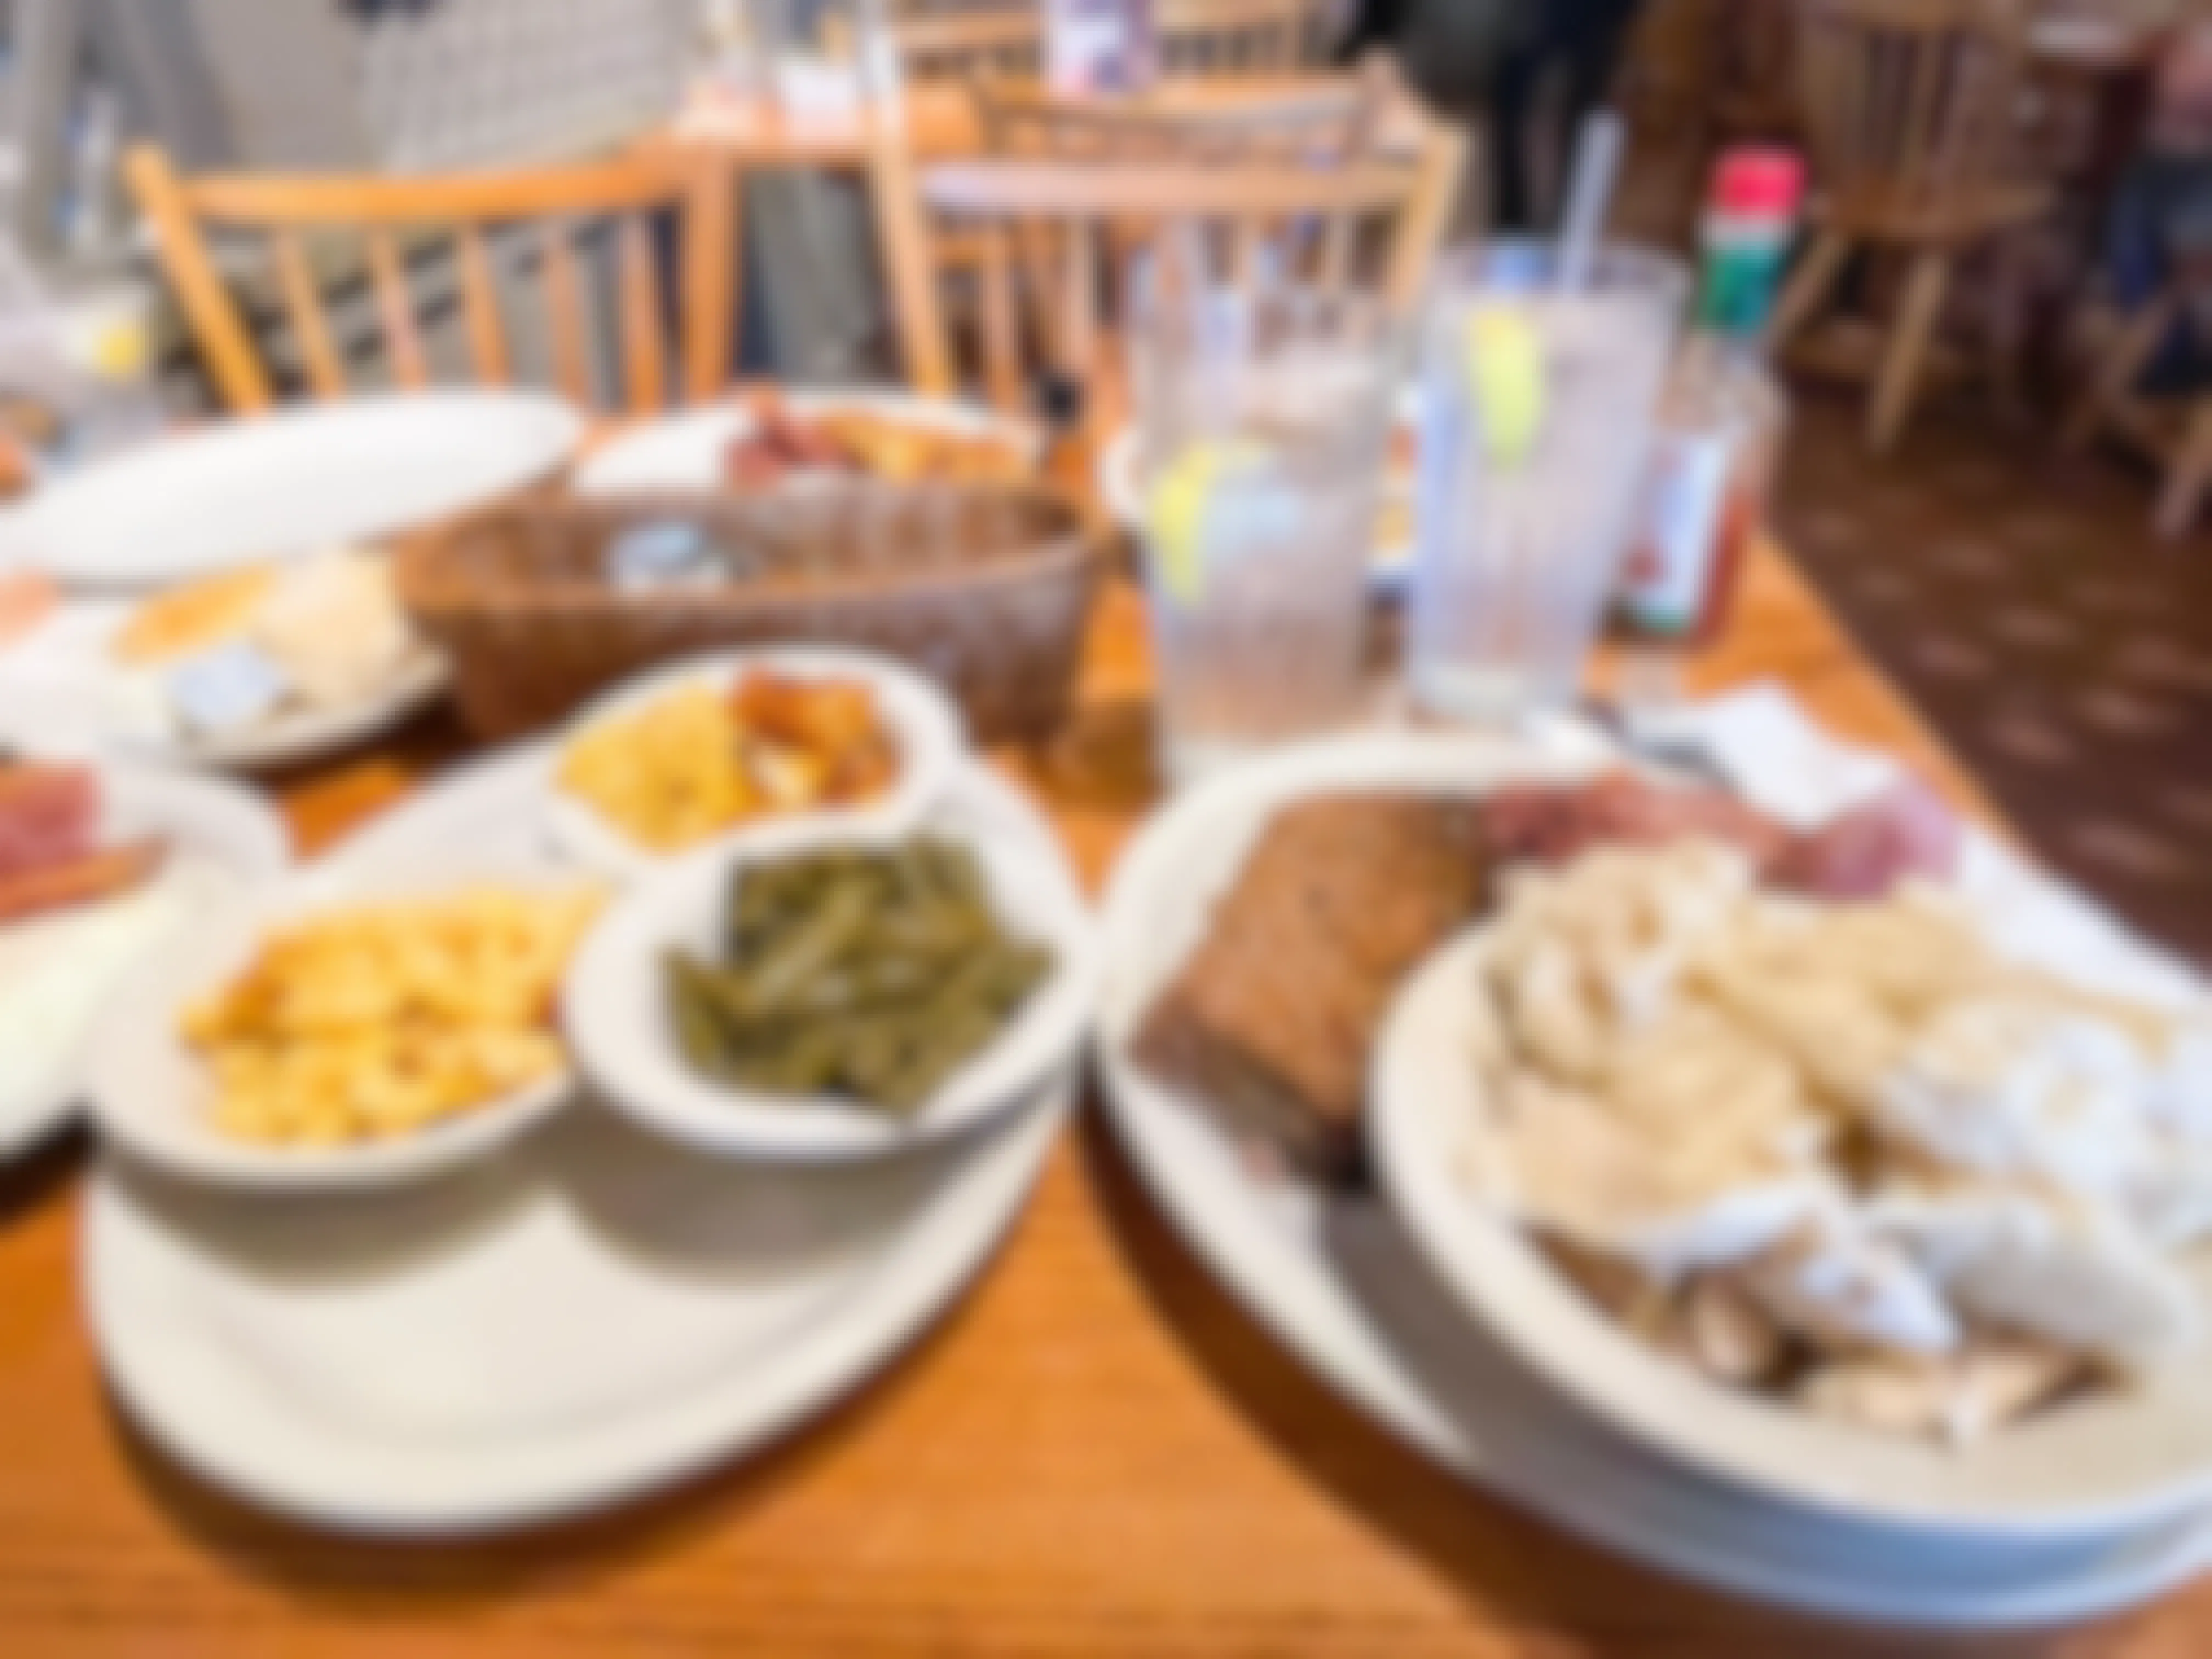 A table at Cracker Barrel covered with plates of different foods from the menu.